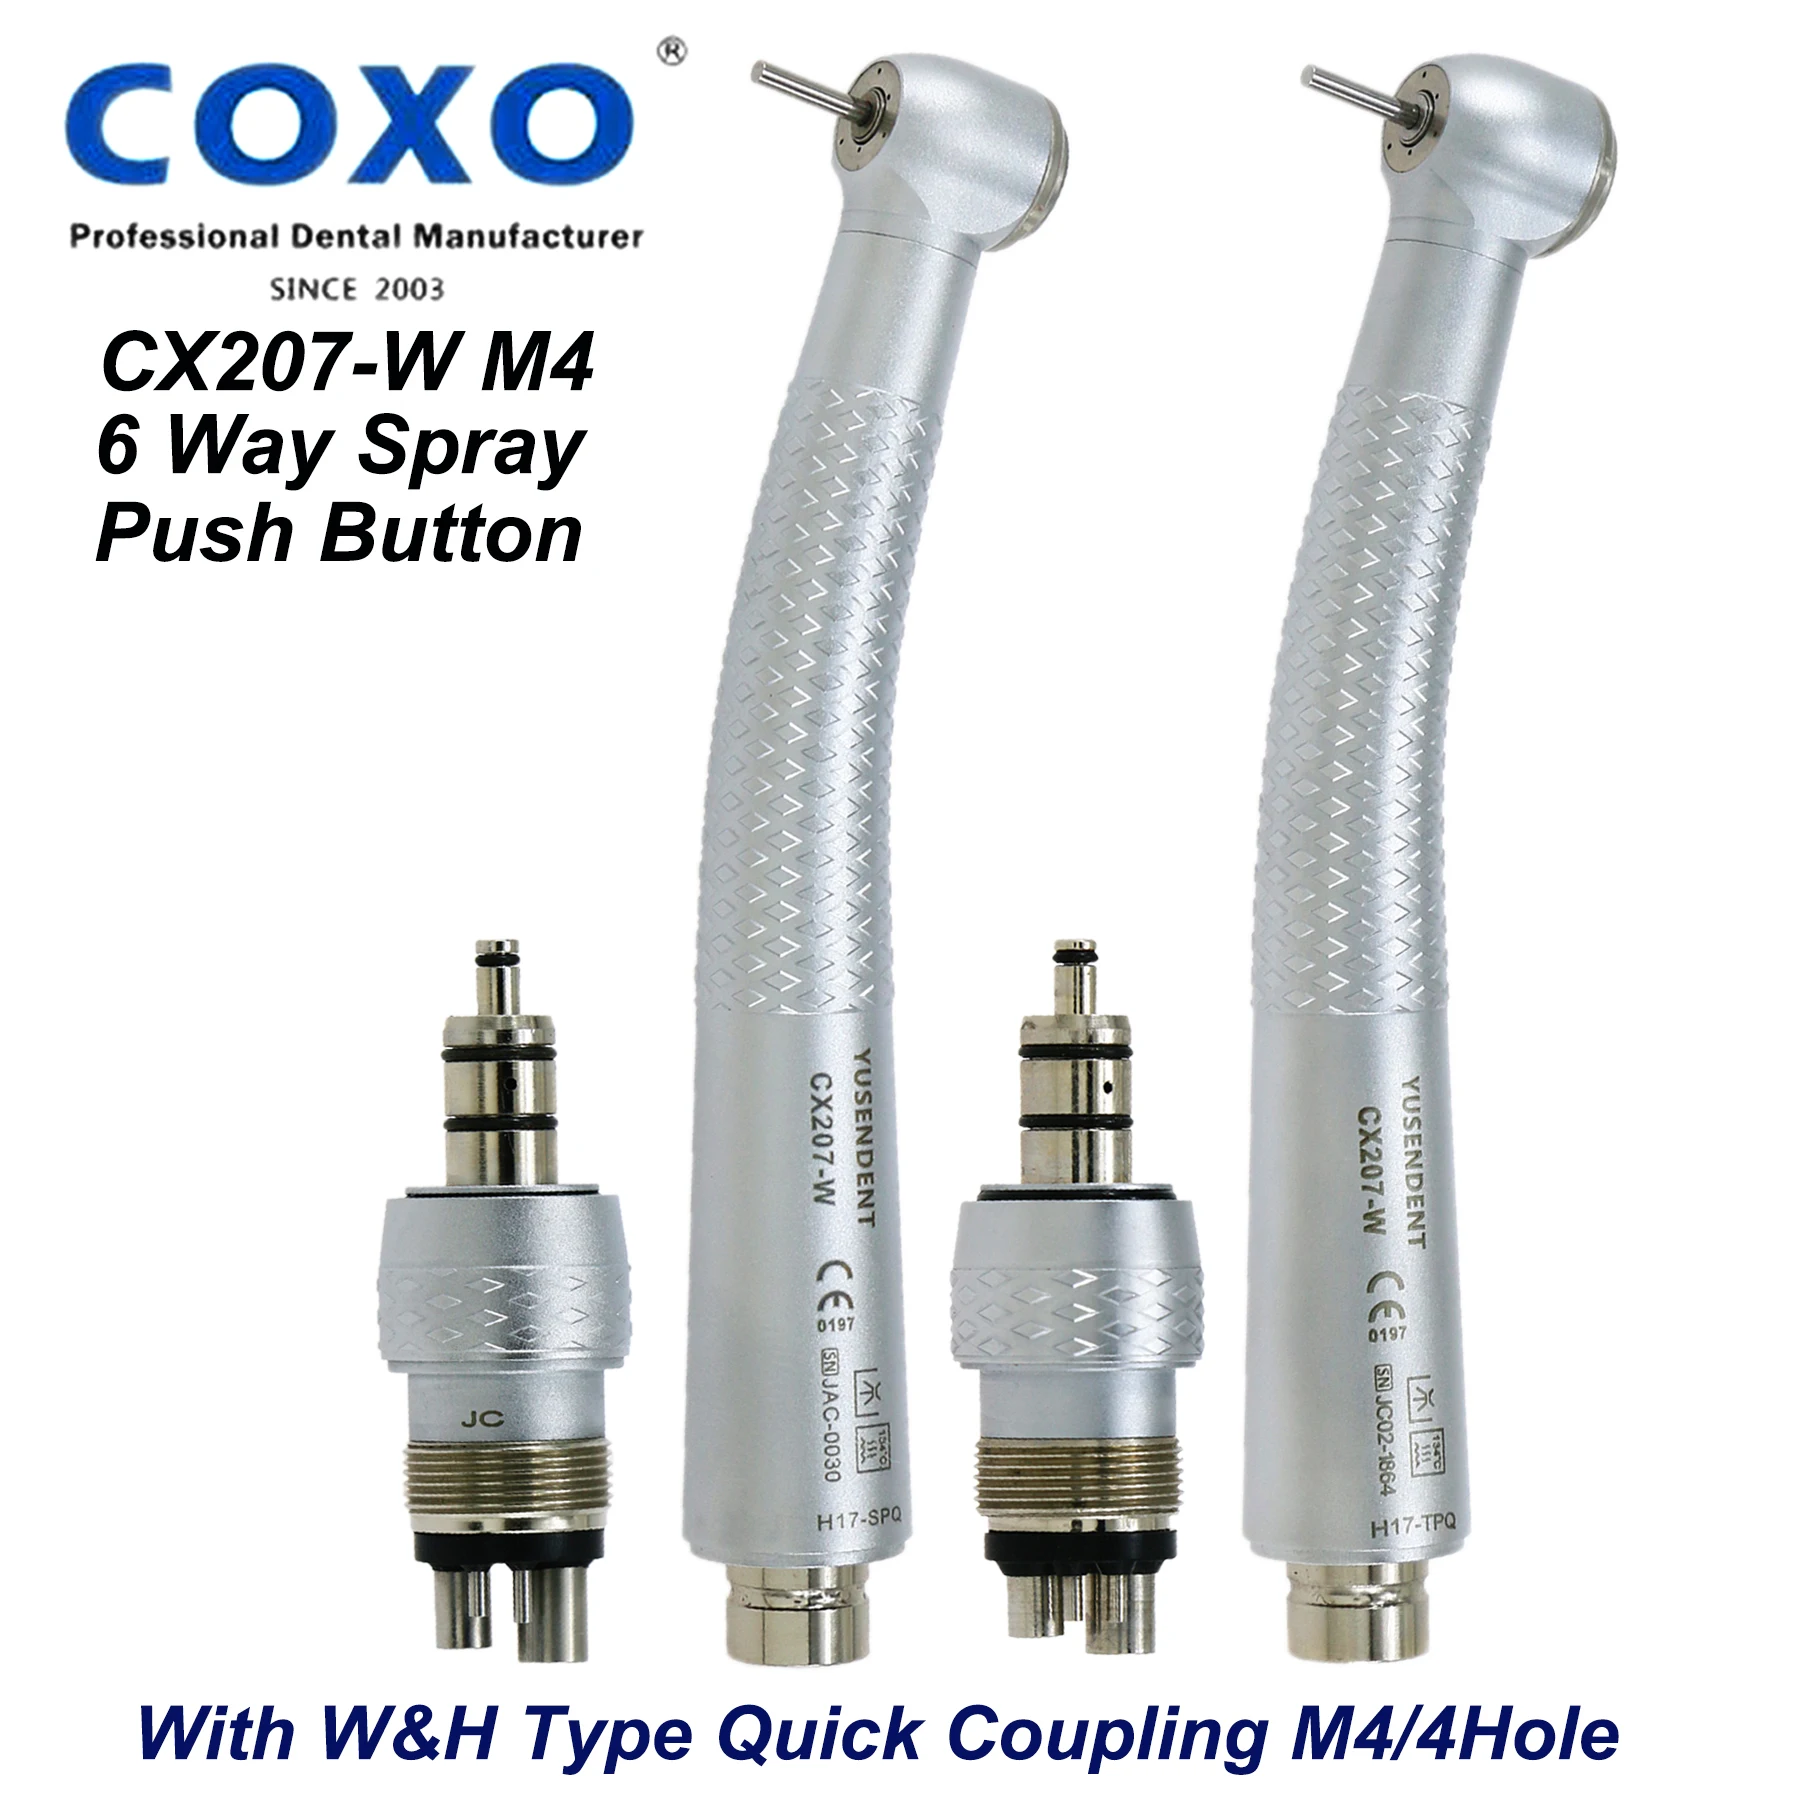 COXO YUSENDENT Standard Big Torque Head High Speed Air Tubrine Quick Coupling Handpiece M4 4Hole CX207-W With Coupler